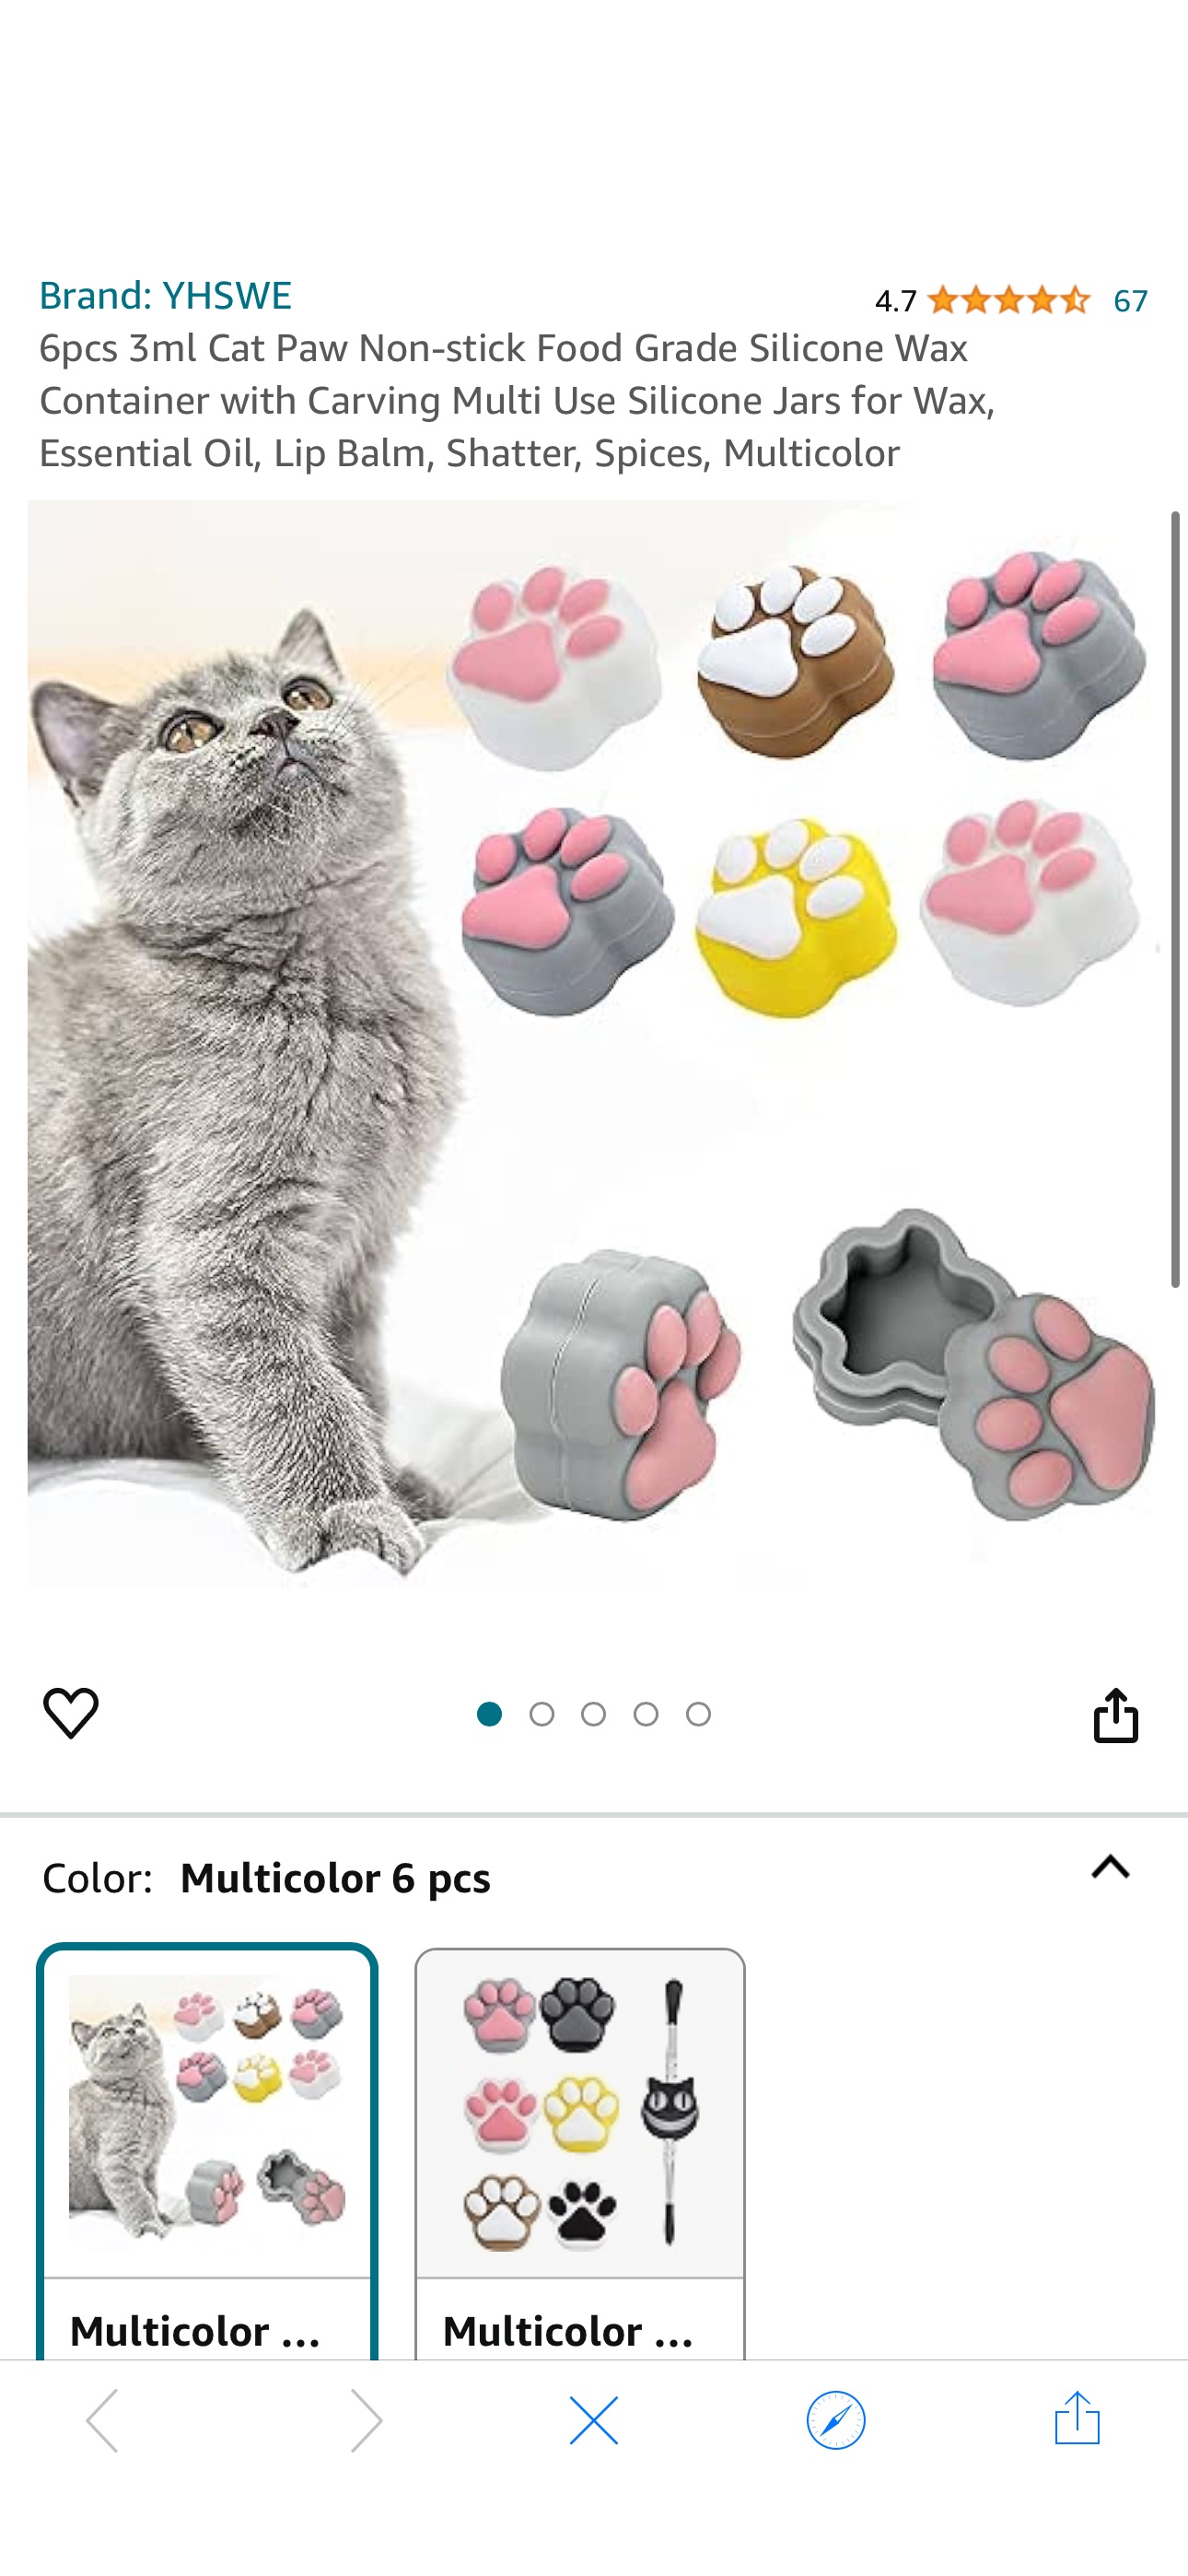 Amazon.com: YHSWE 6pcs 3ml Cat Paw Non-stick Food Grade Silicone Wax Container with Carving Multi Use Silicone Jars for Wax, Essential Oil, Lip Balm, Shatter, Spices, Multicolor: Home & Kitchen